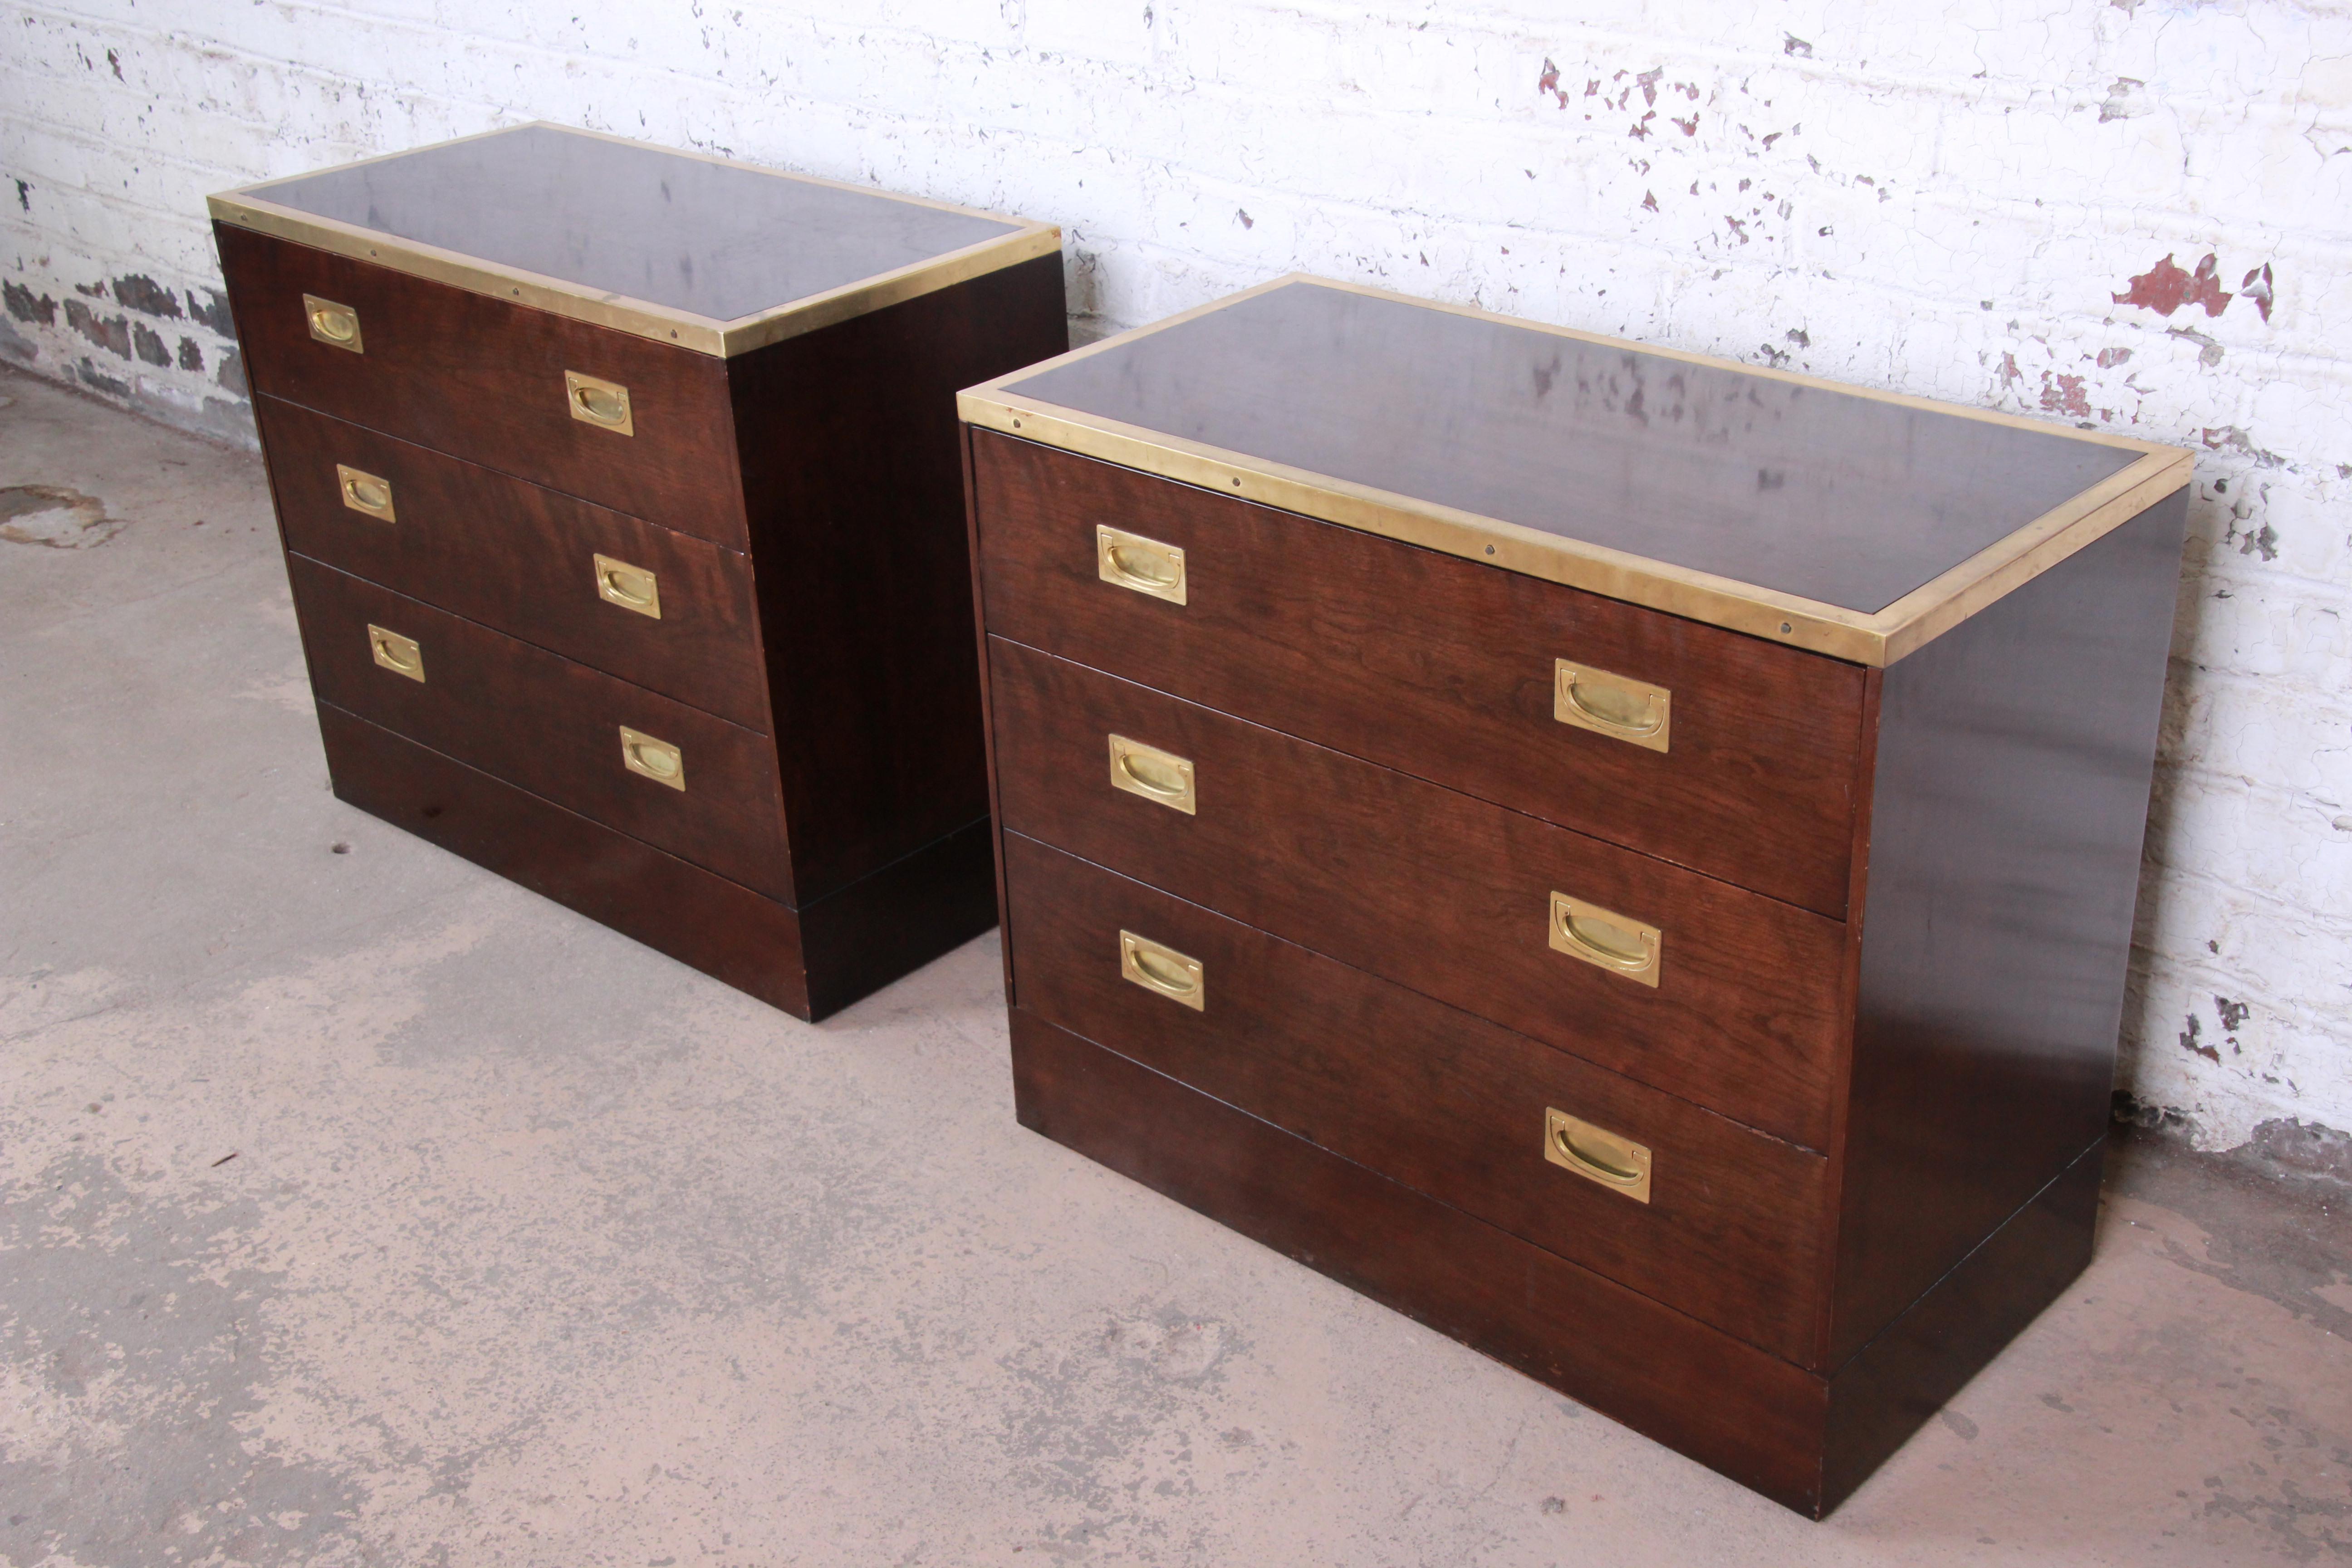 A gorgeous pair of Mid-Century Modern Hollywood Regency Campaign style nightstands or bachelor chests by Milo Baughman for the exclusive Custom Collection for Directional. The chests feature rich wood grain with elegant brass trim and original brass